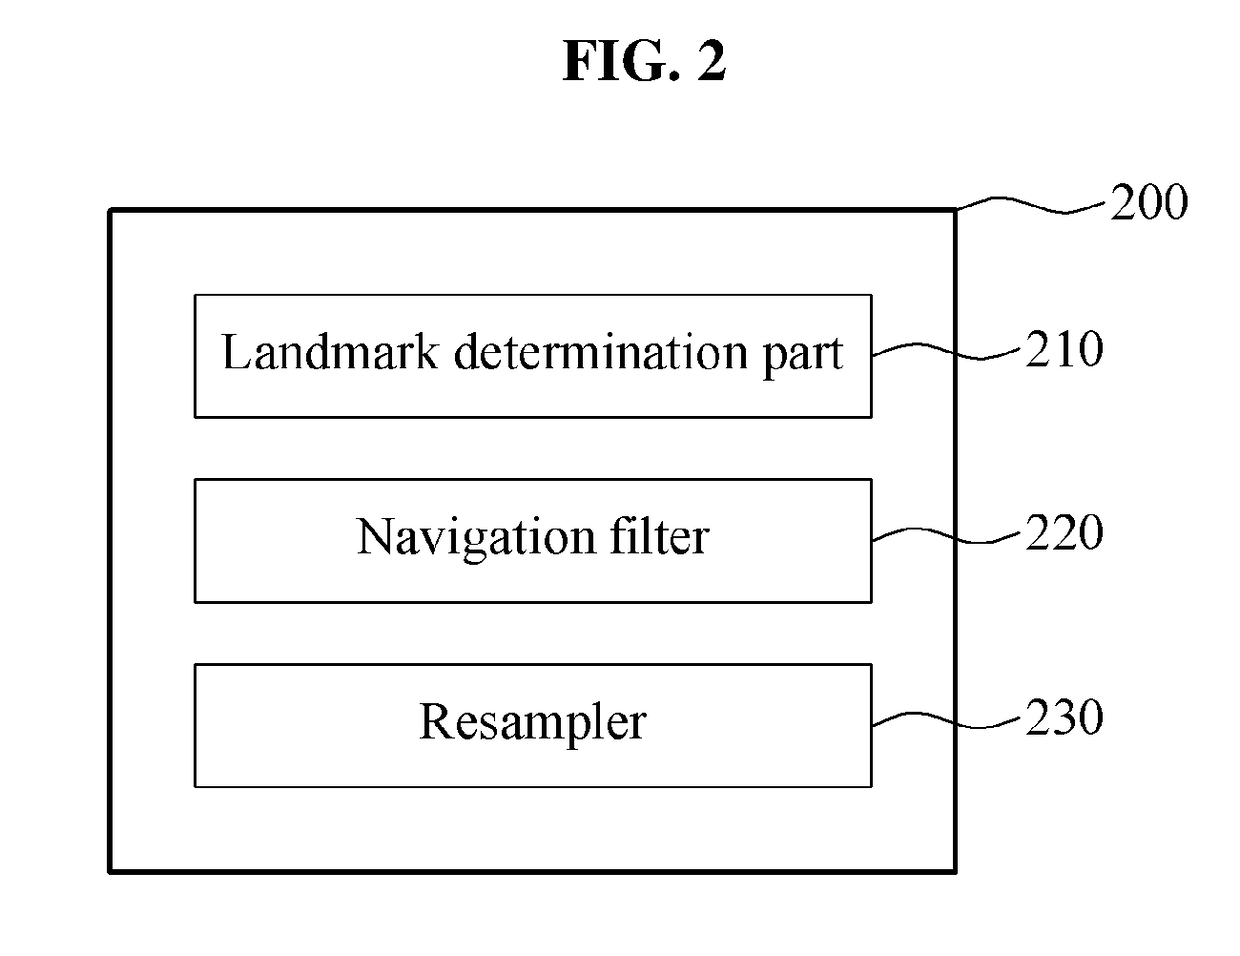 Apparatus and Method For Image Navigation and Registration of Geostationary Remote Sensing Satellites